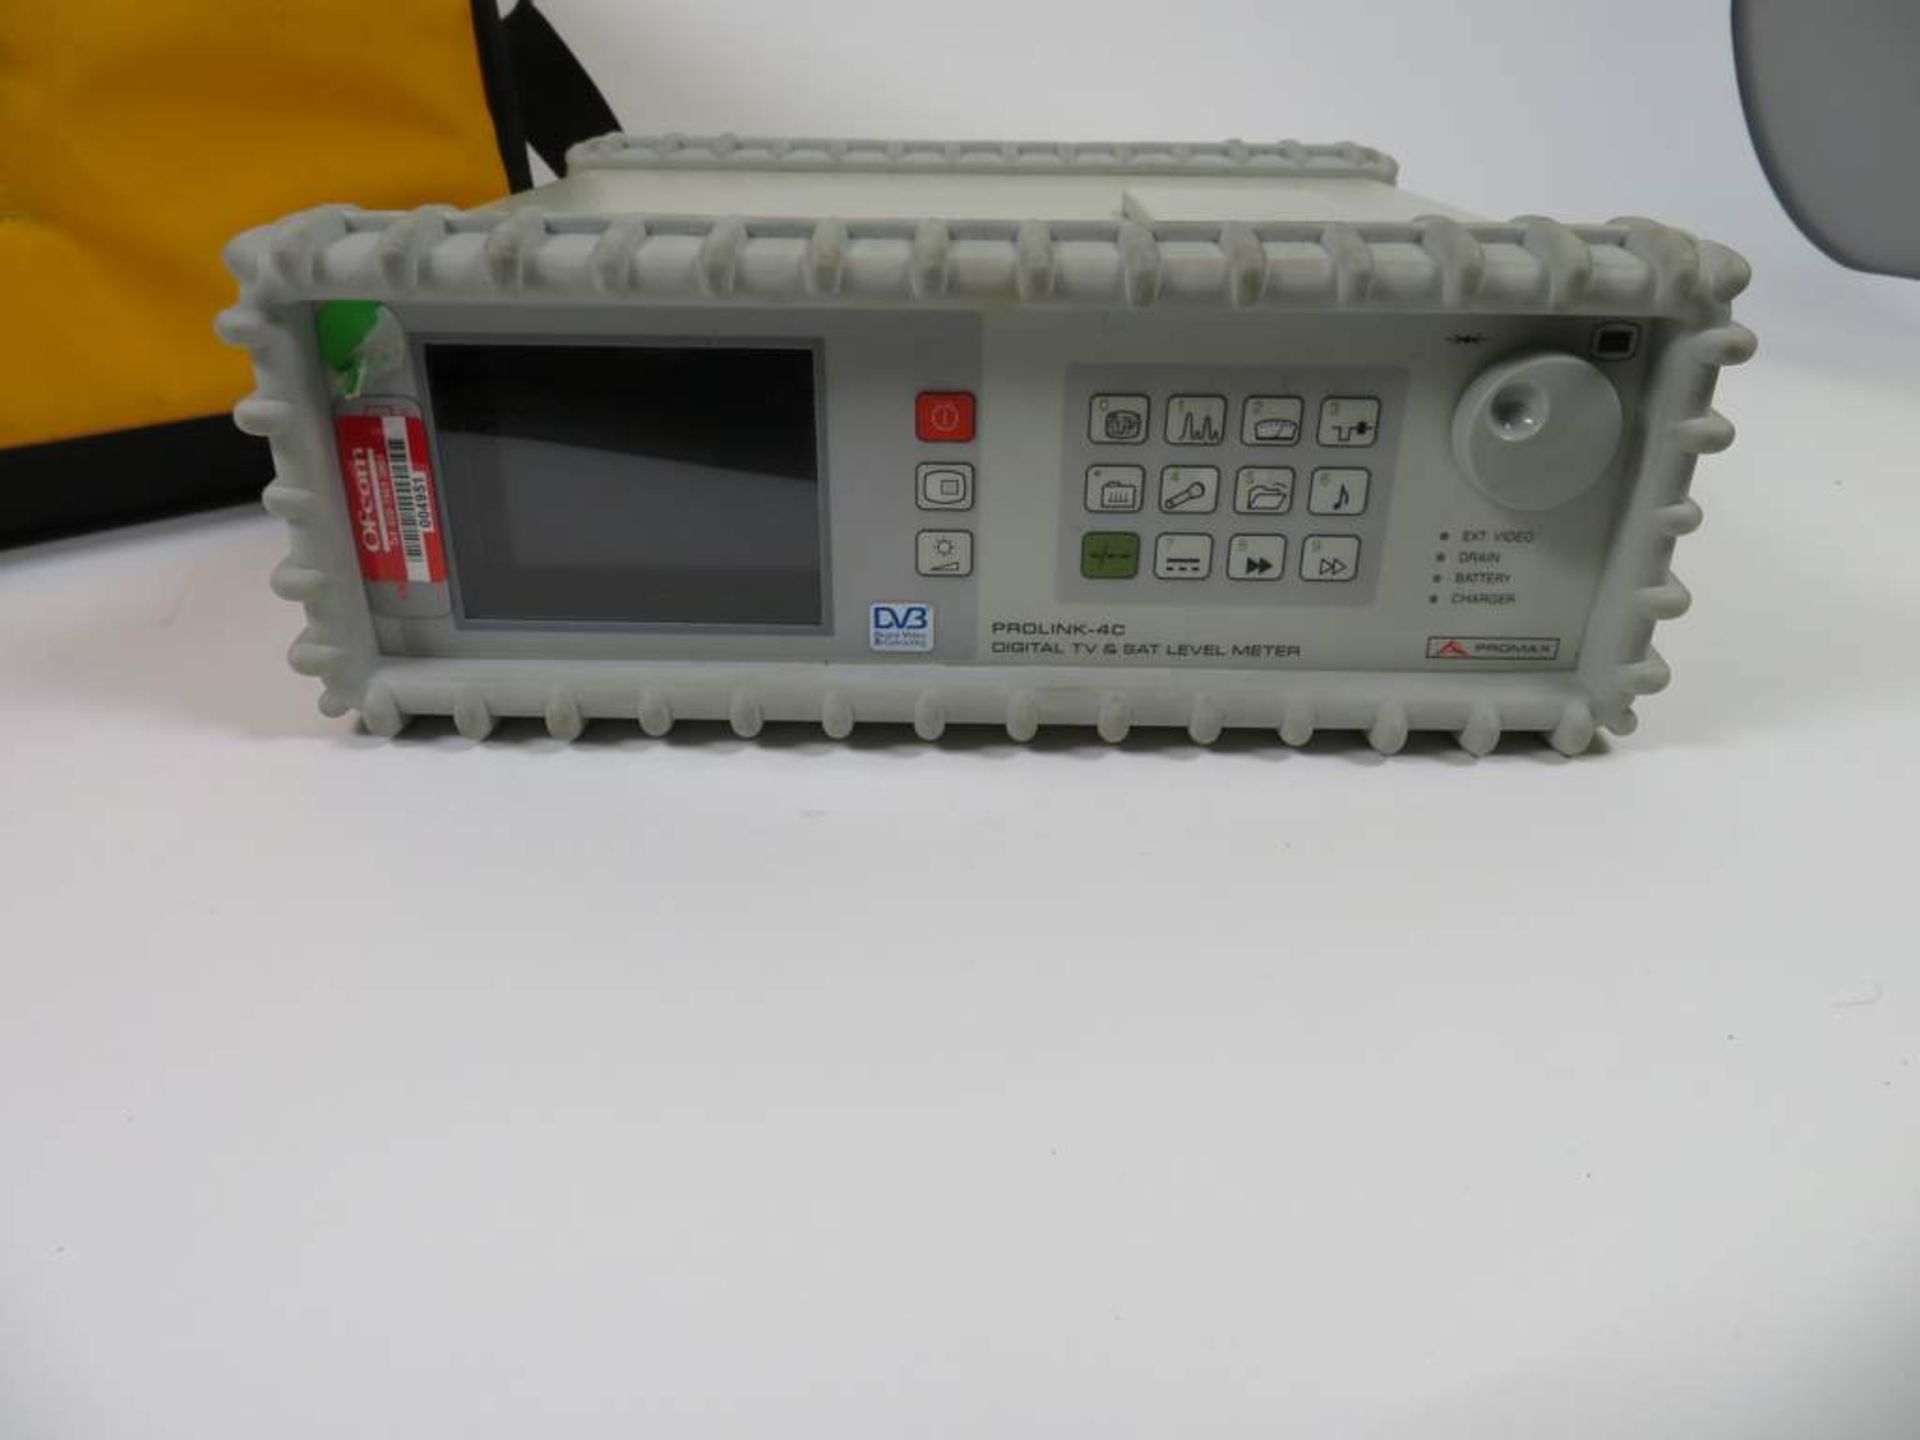 Promax Prolink-3+ TV and Satellite Signal Level Meter - Image 2 of 4